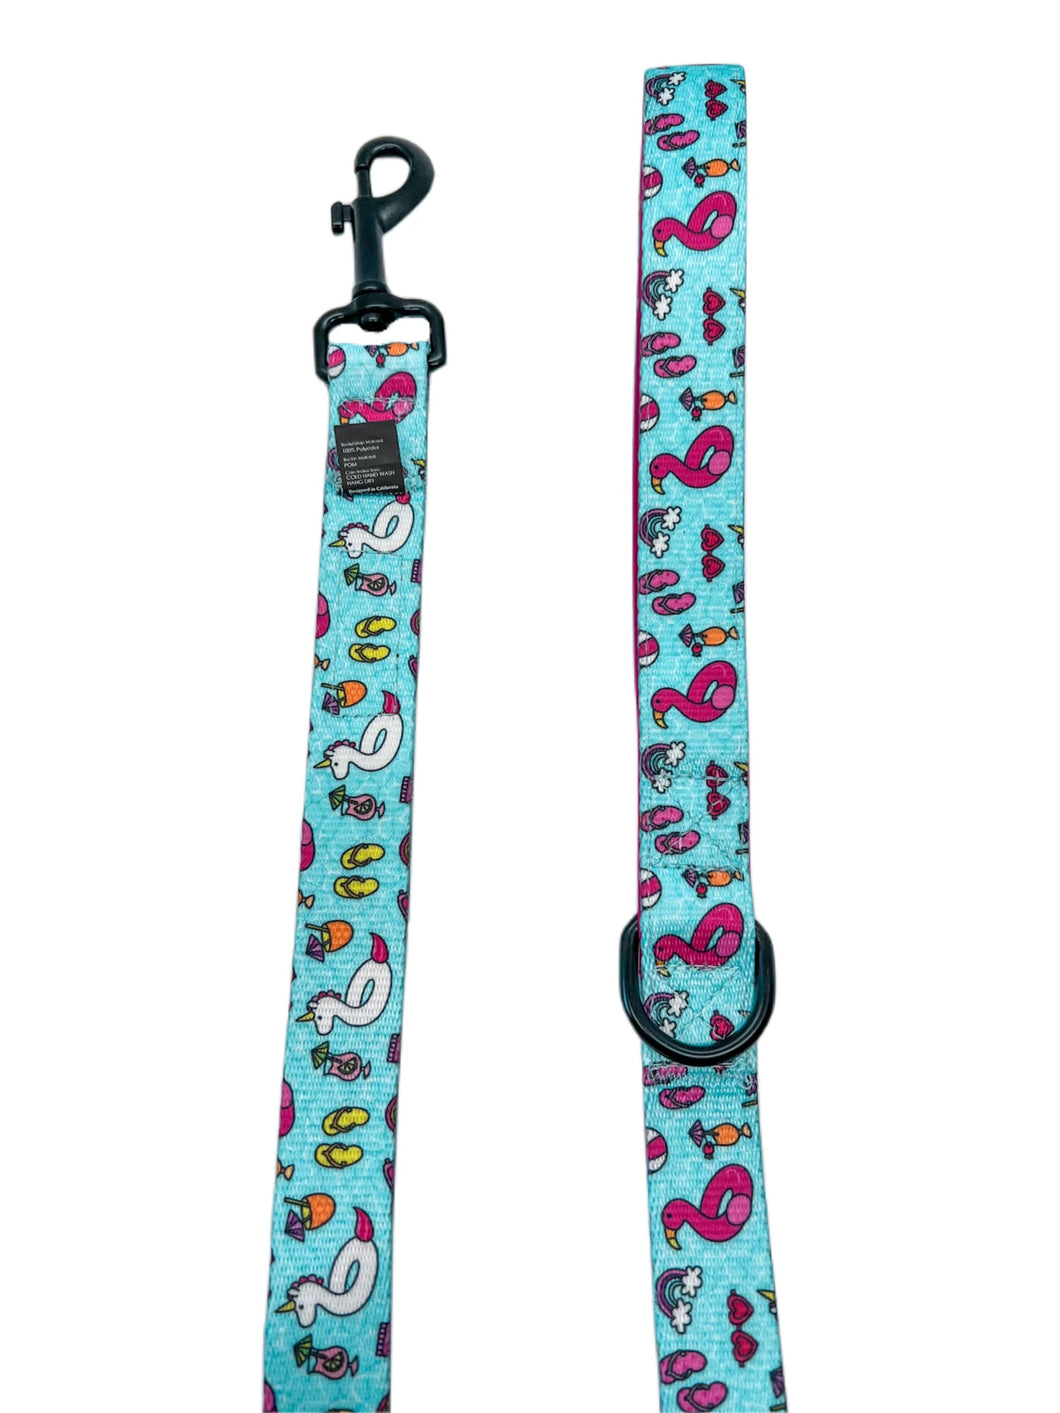 Pool Day 5 Foot Comfort Leash - ONE SIDE FLAMINGOS, OTHER SIDE UNICORNS